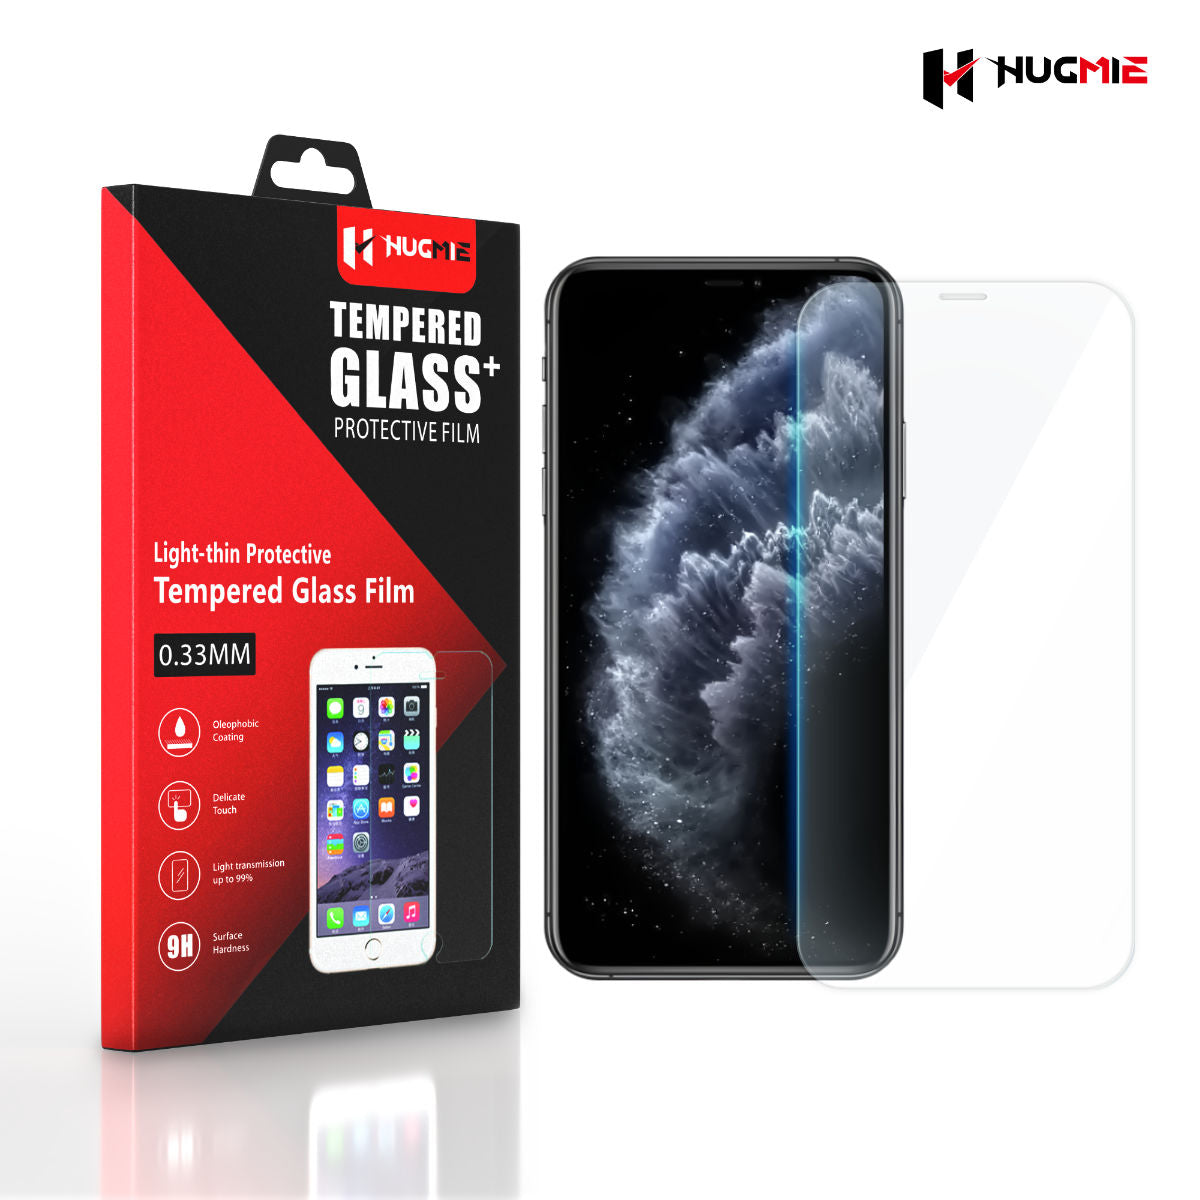 2x Hugmie iPhone 11 Pro Max/XS Max Glass Screen Protector